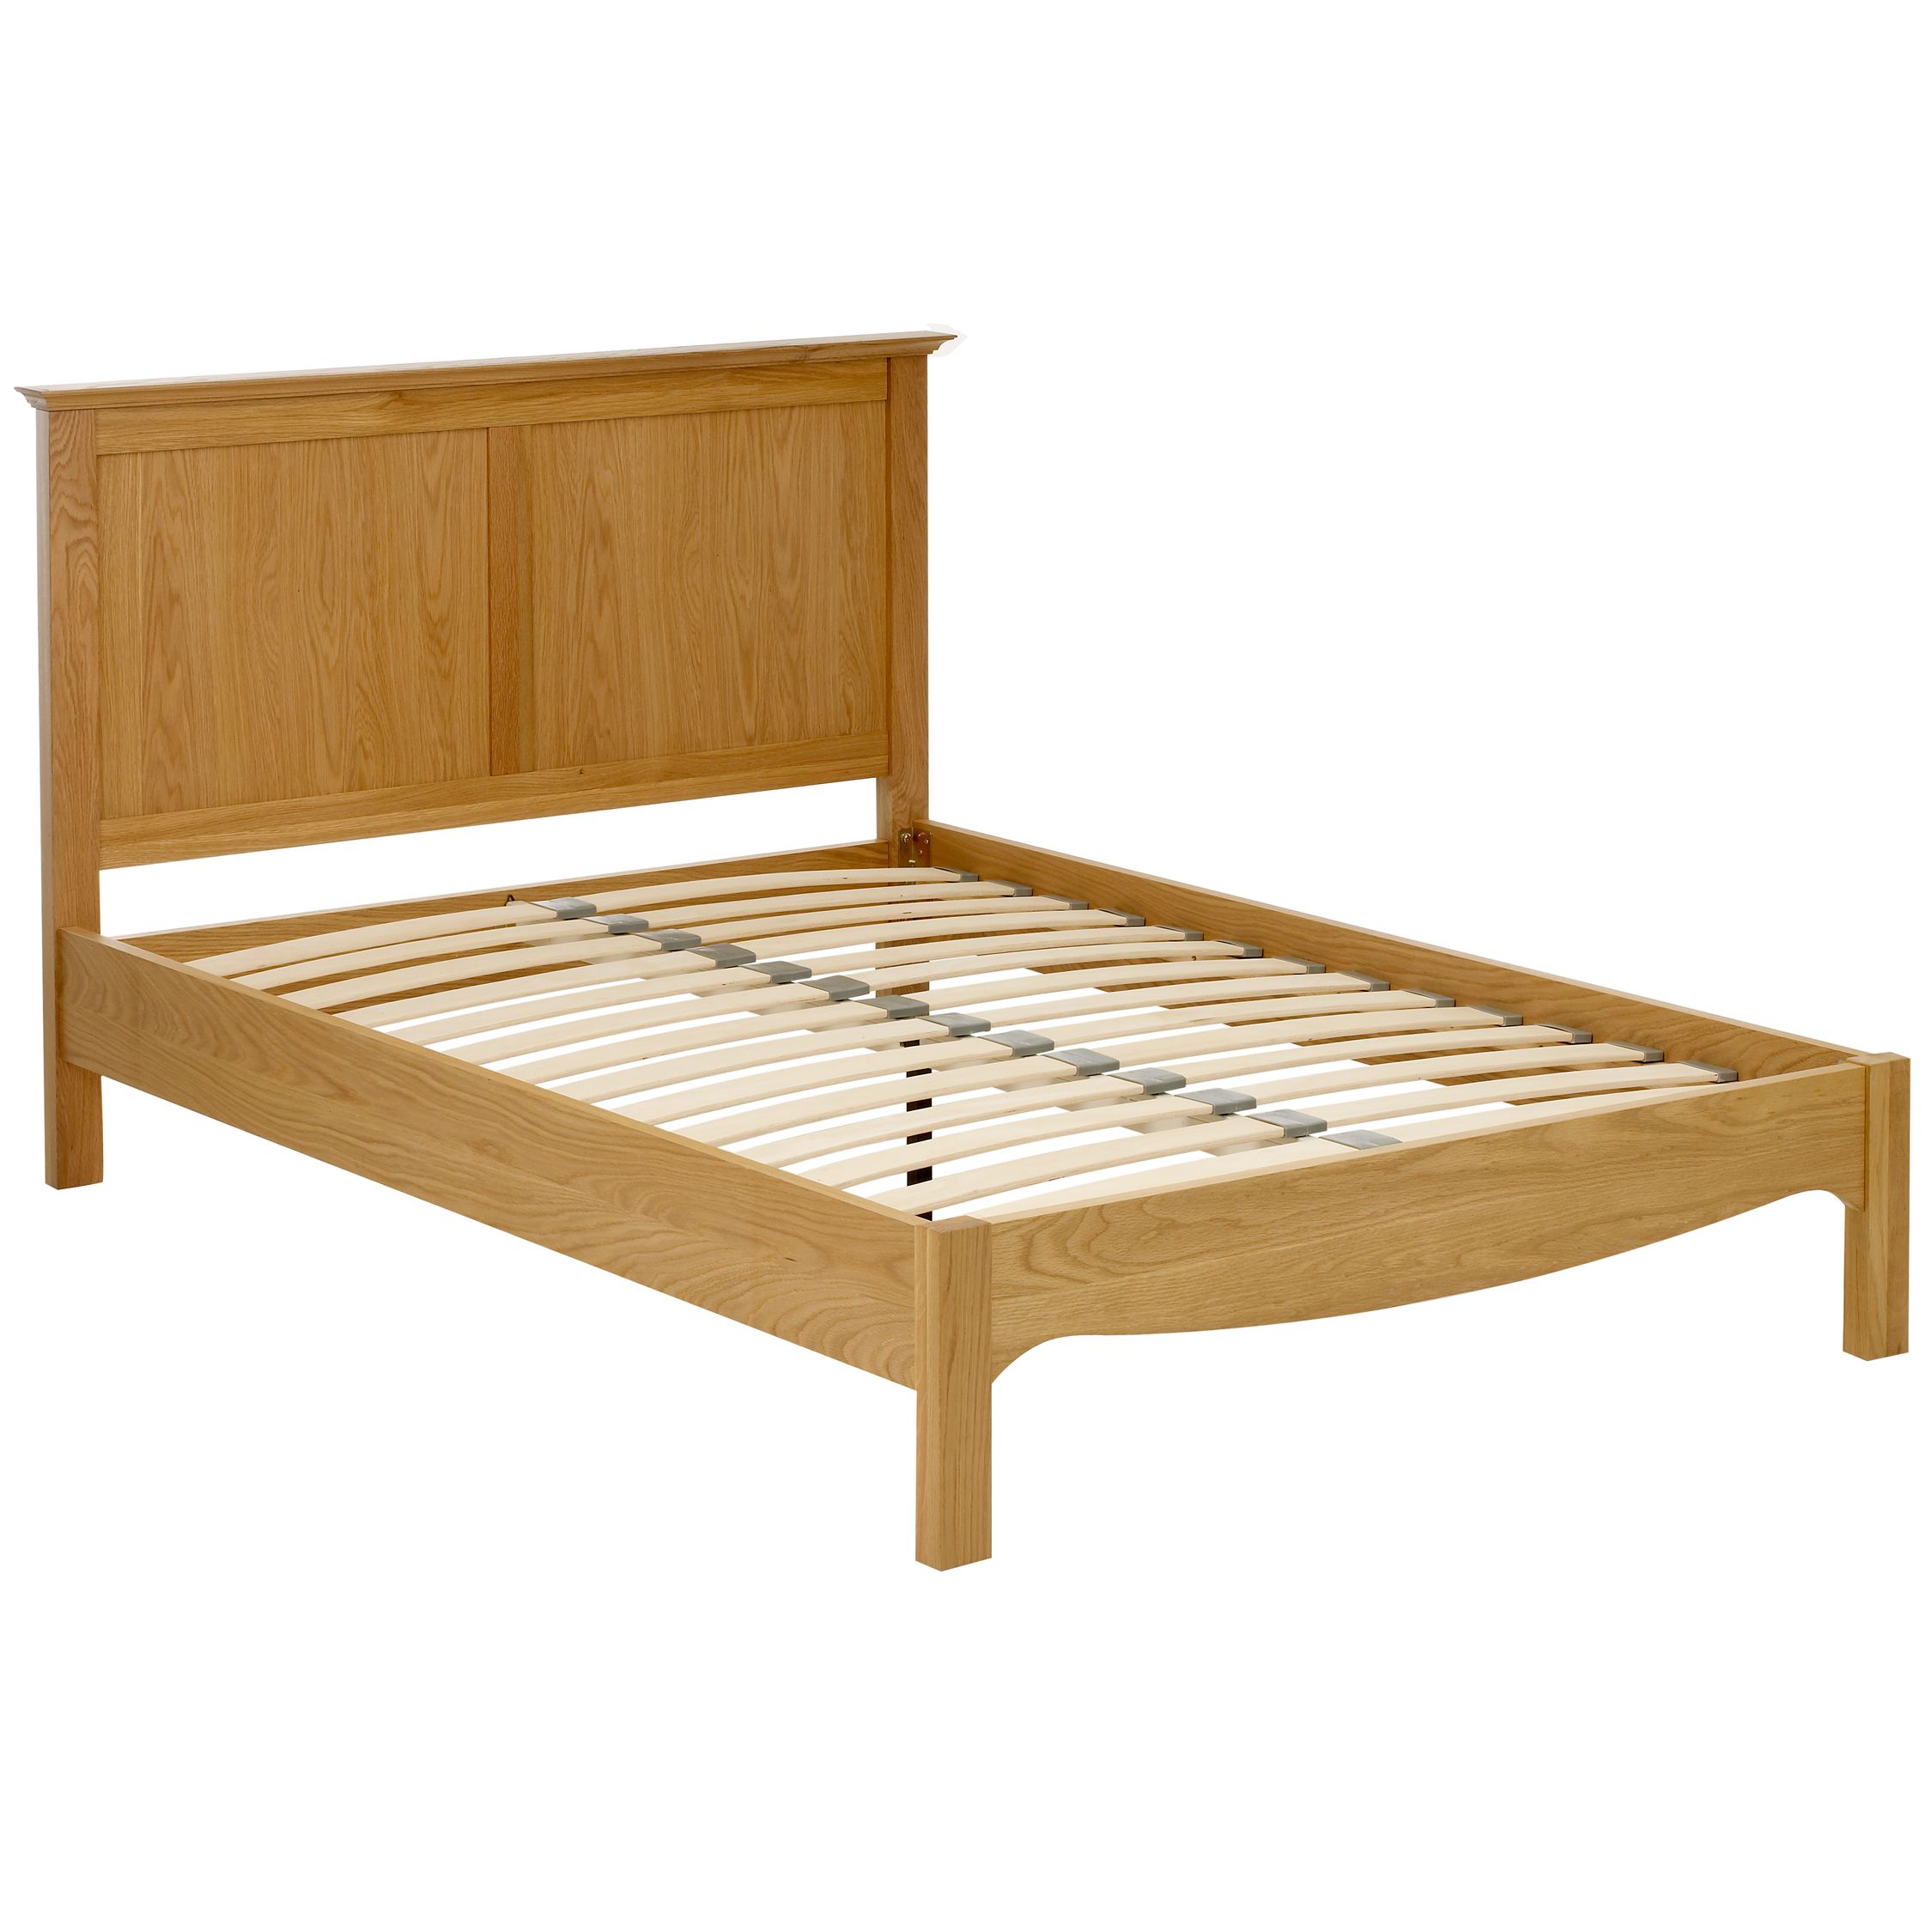 John Lewis Darcy Low End Bedstead, Double at John Lewis